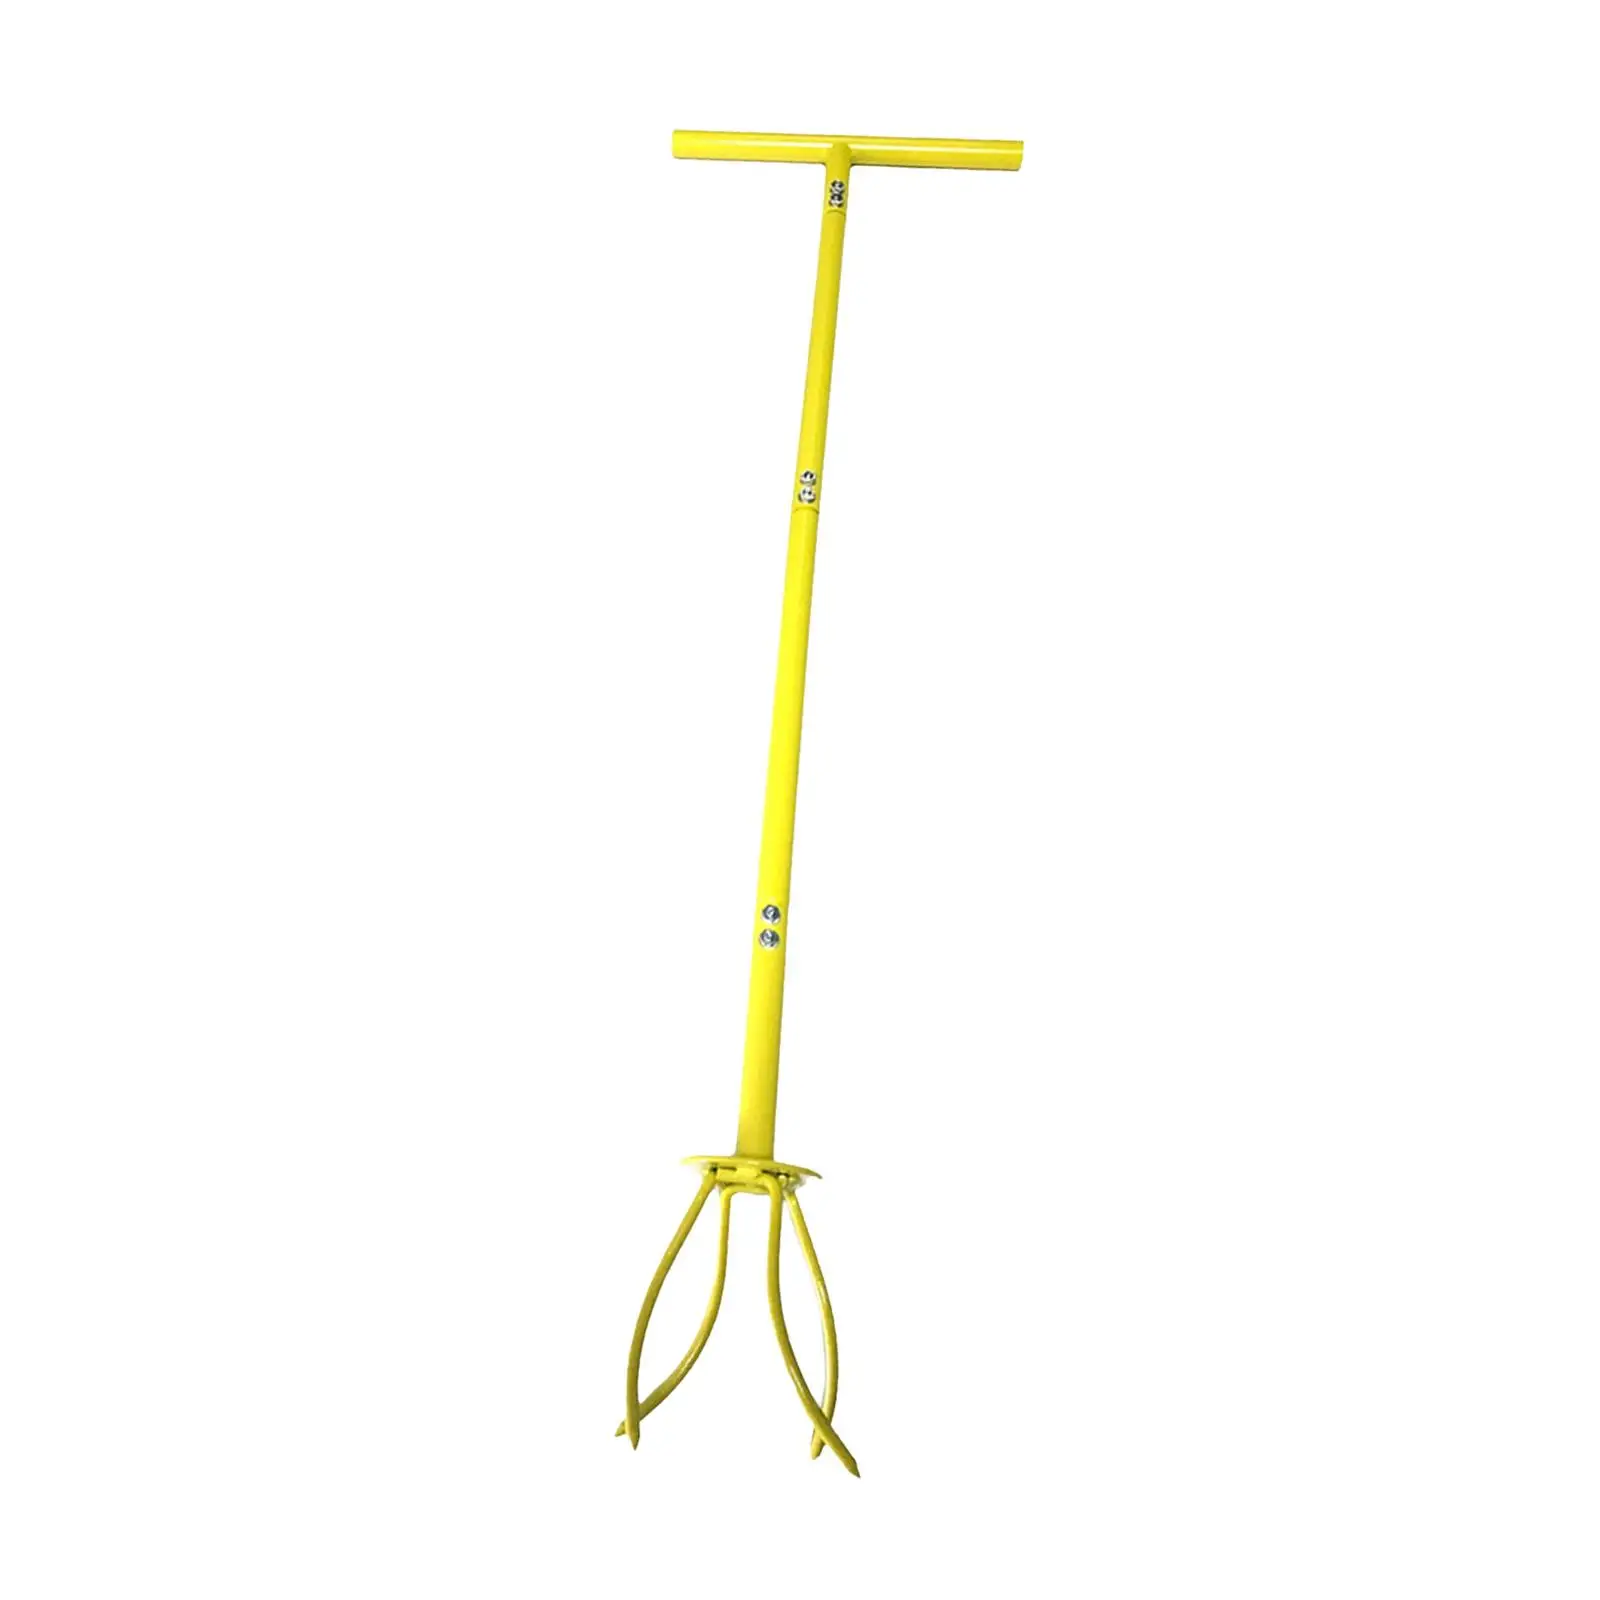 Manual Hand Tiller for Narrow and Wide Areas Gardening Claw Tool Cultivator with Adjustable Long Handle Agriculture Farmer Tool